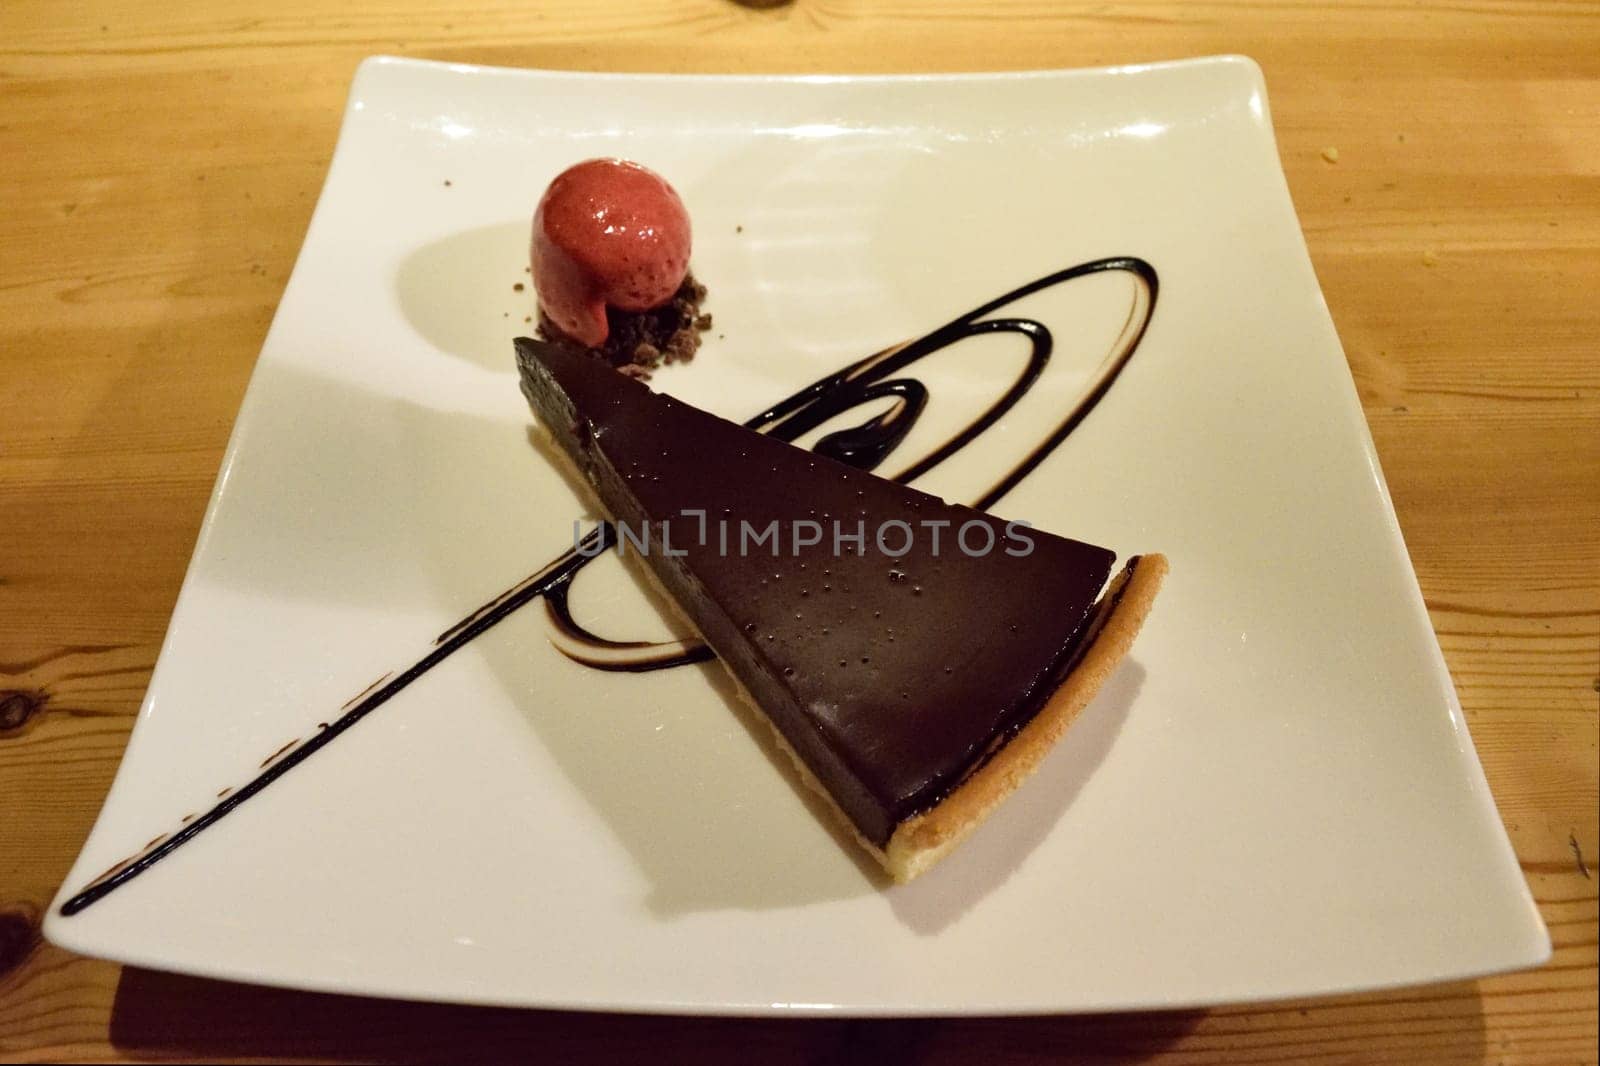 A slice of chocolate tart with a scoop of raspberry sorbet on a white plate, garnished with chocolate sauce, placed on a wooden table.